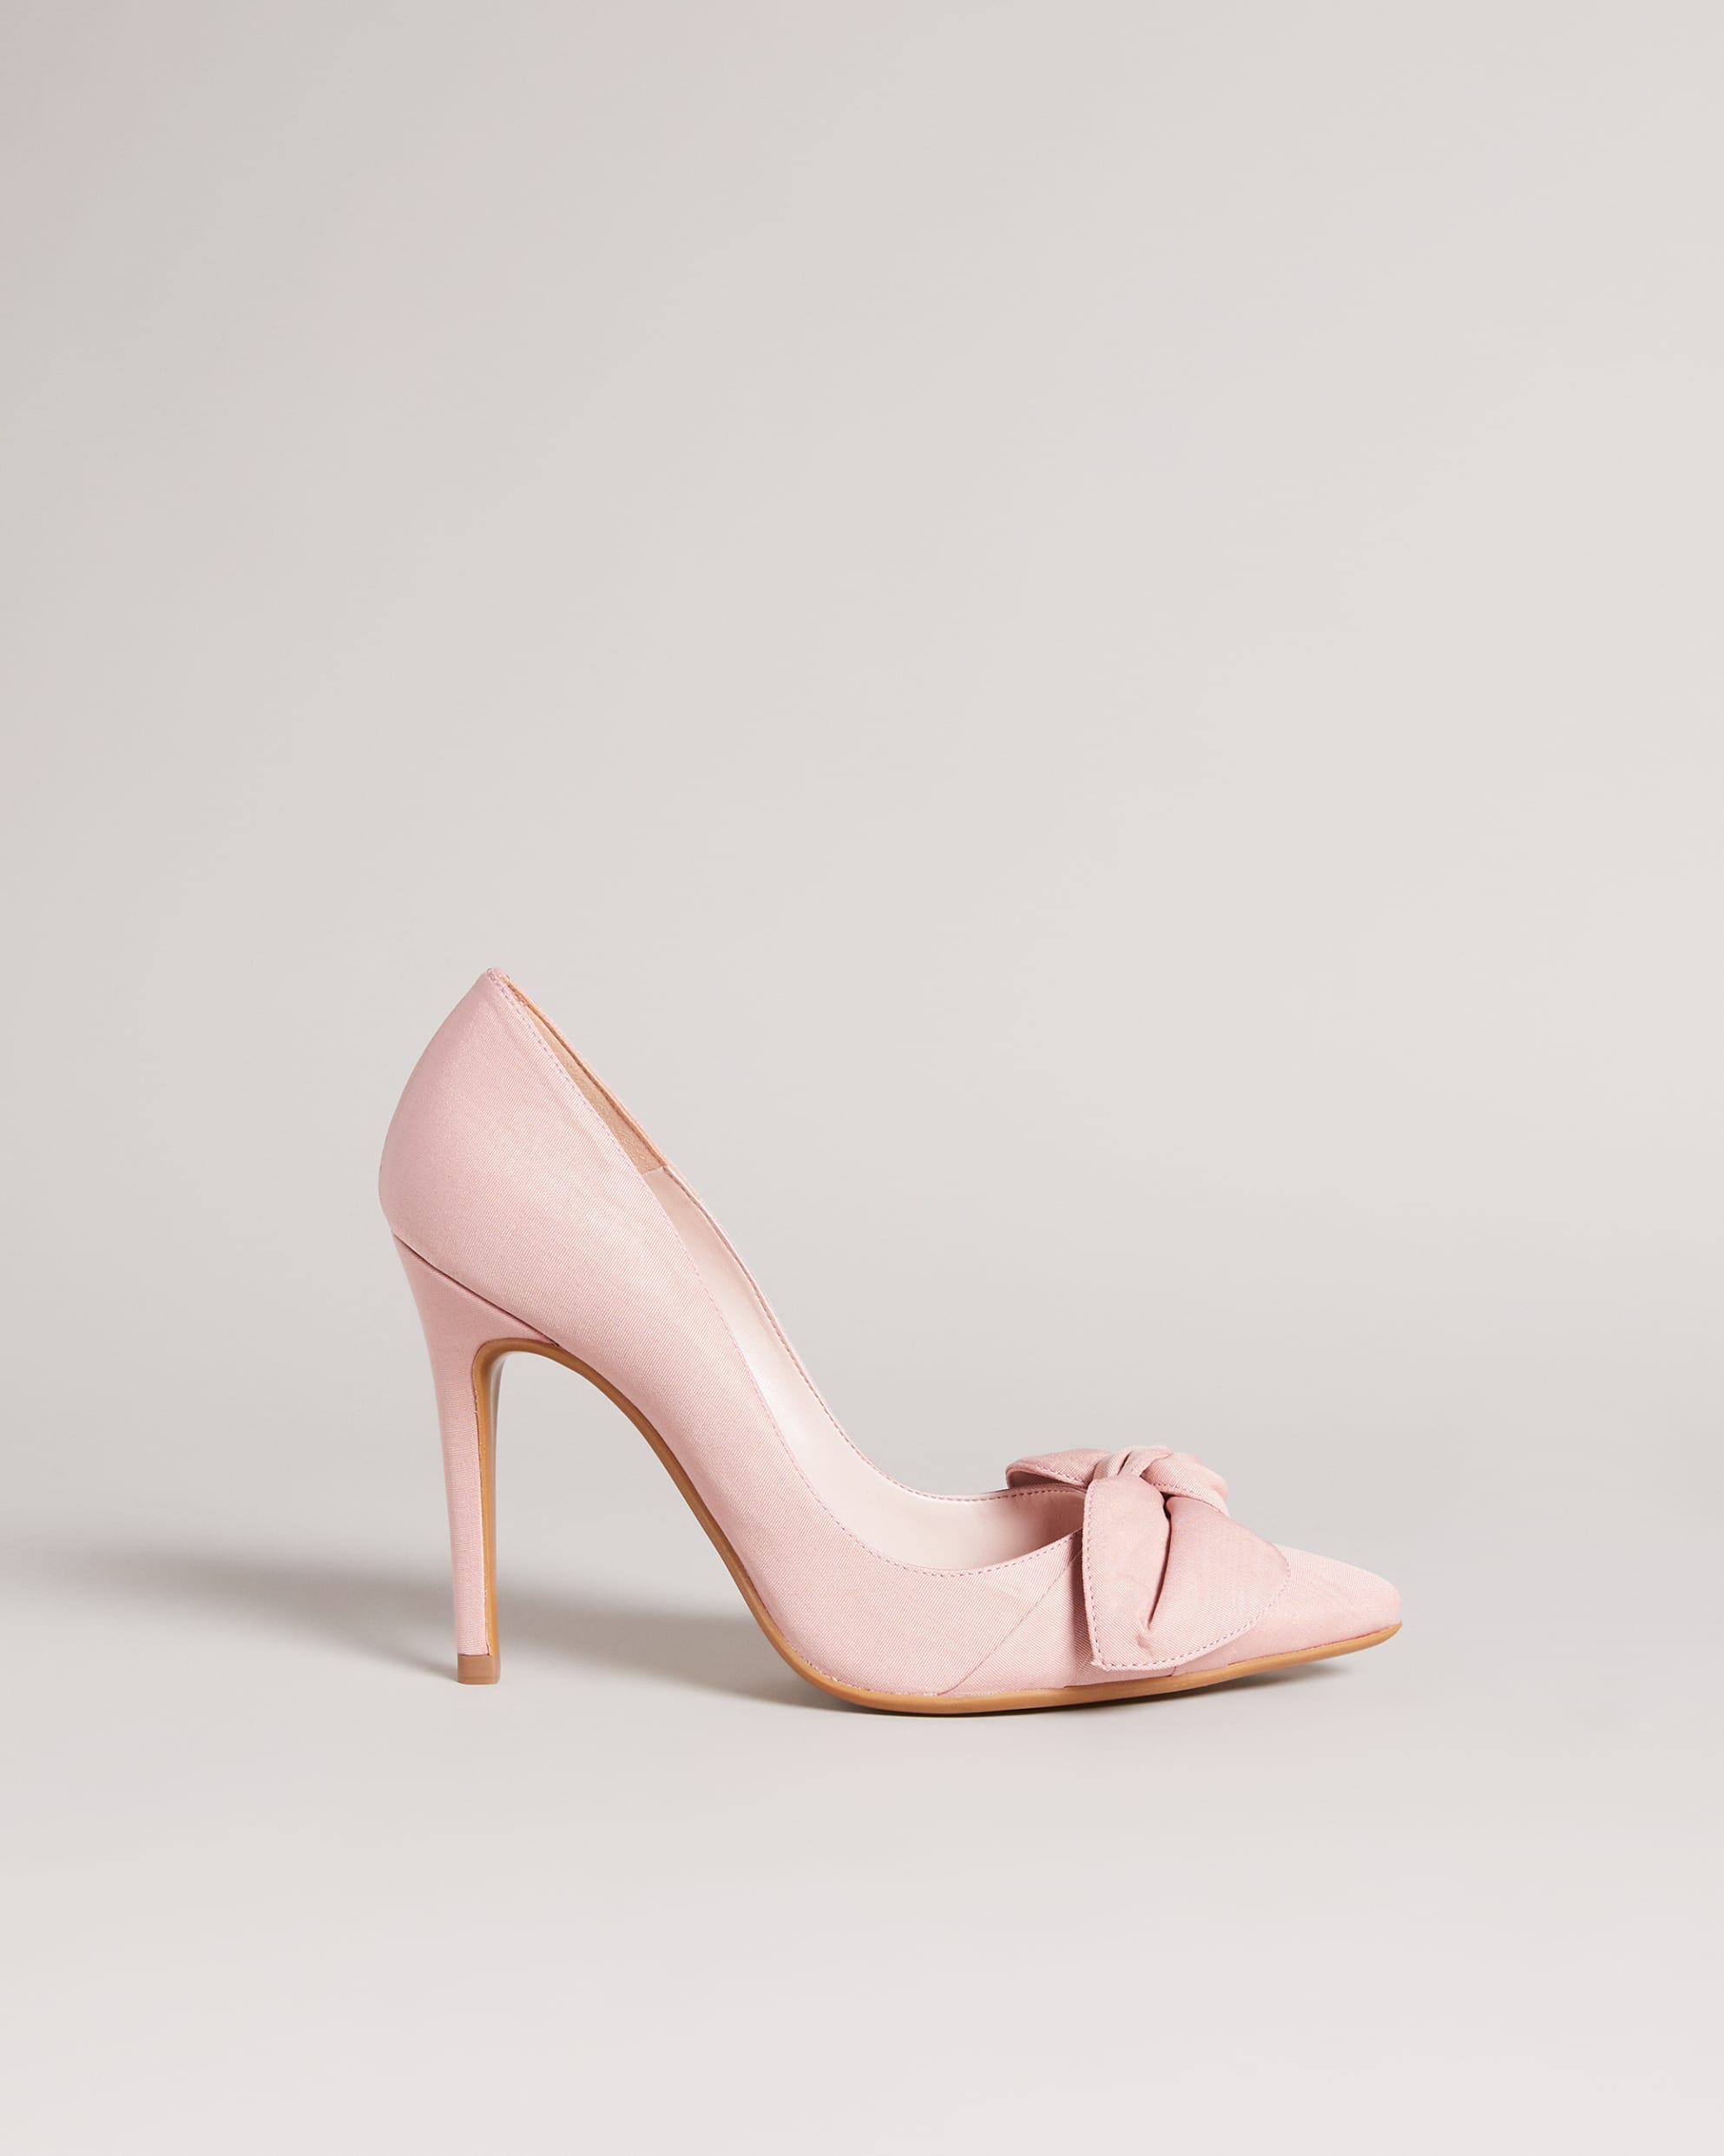 Hyana Moire Satin Bow Court Shoes Dusky-Pink